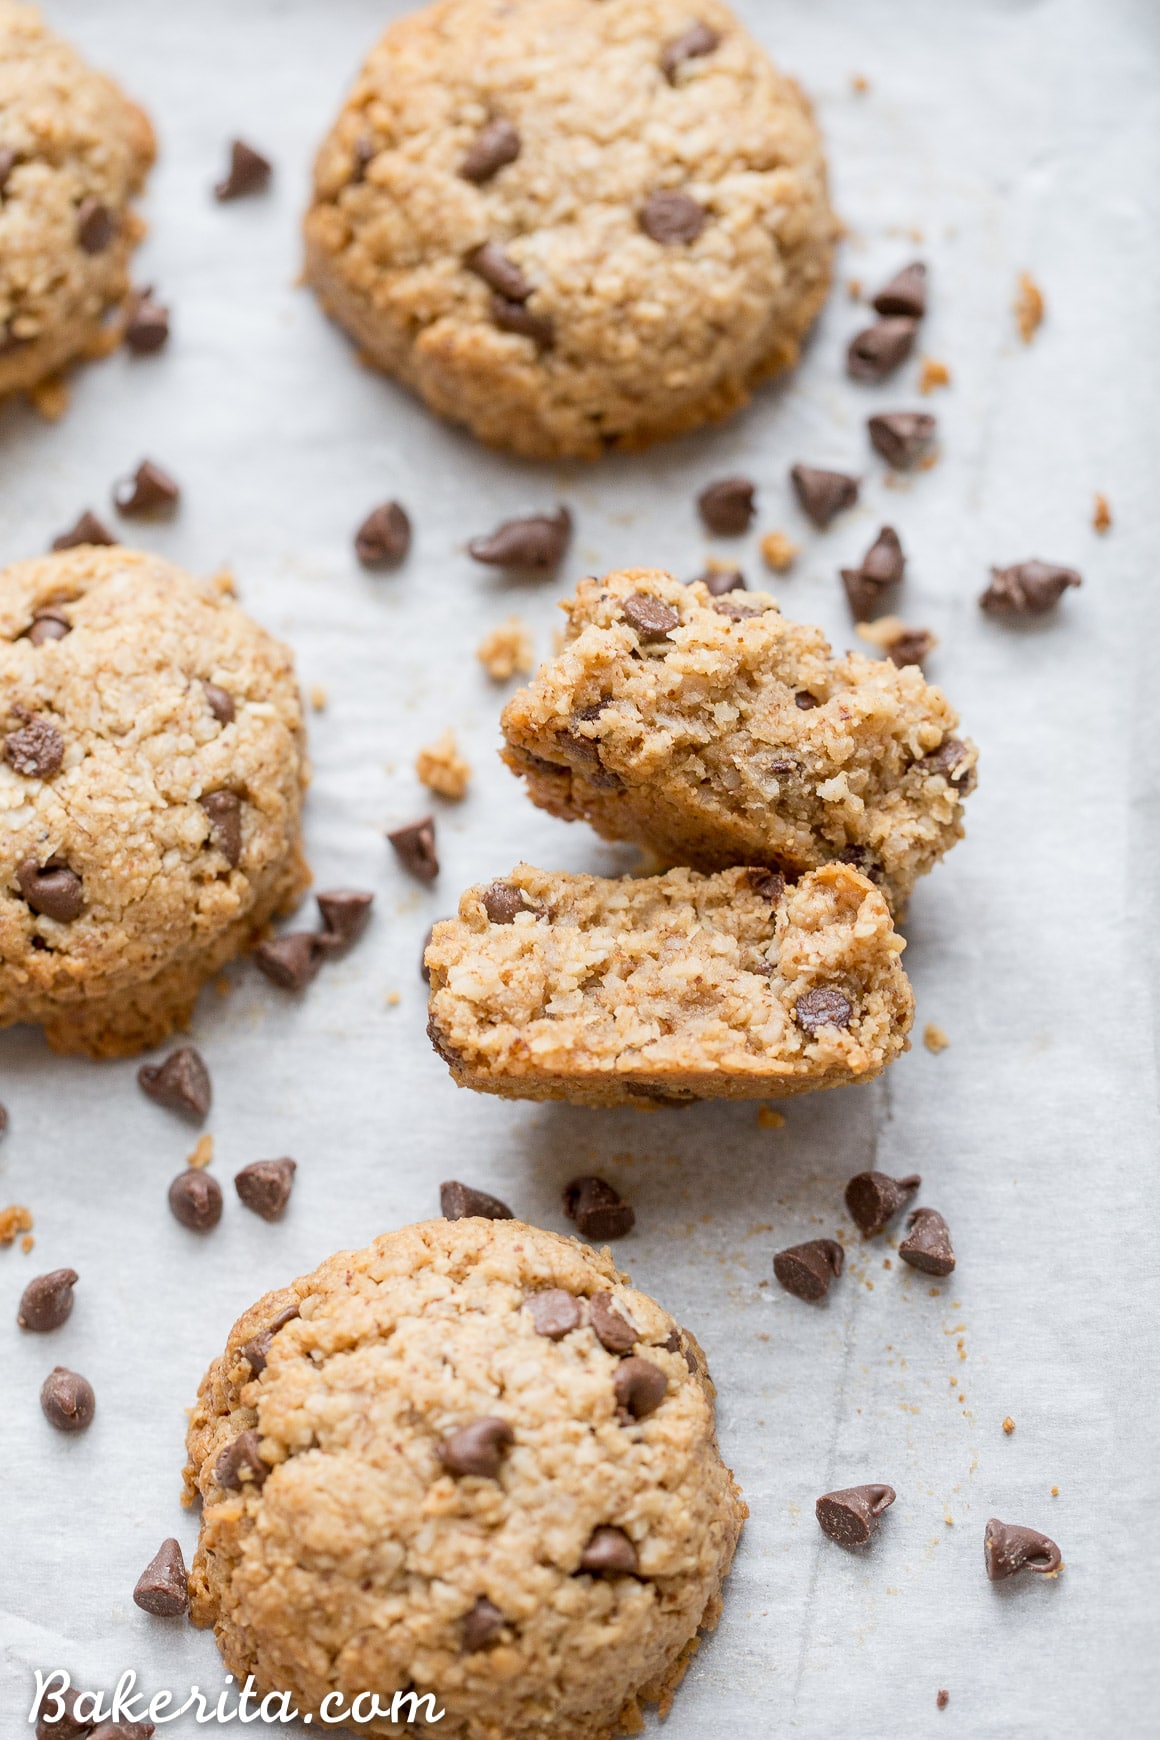 These Chocolate Chip Macaroons are a heavenly snack or dessert - they taste like a cross between a macaroon and a chocolate chip cookie! Plus, they're gluten-free, Paleo, and vegan.